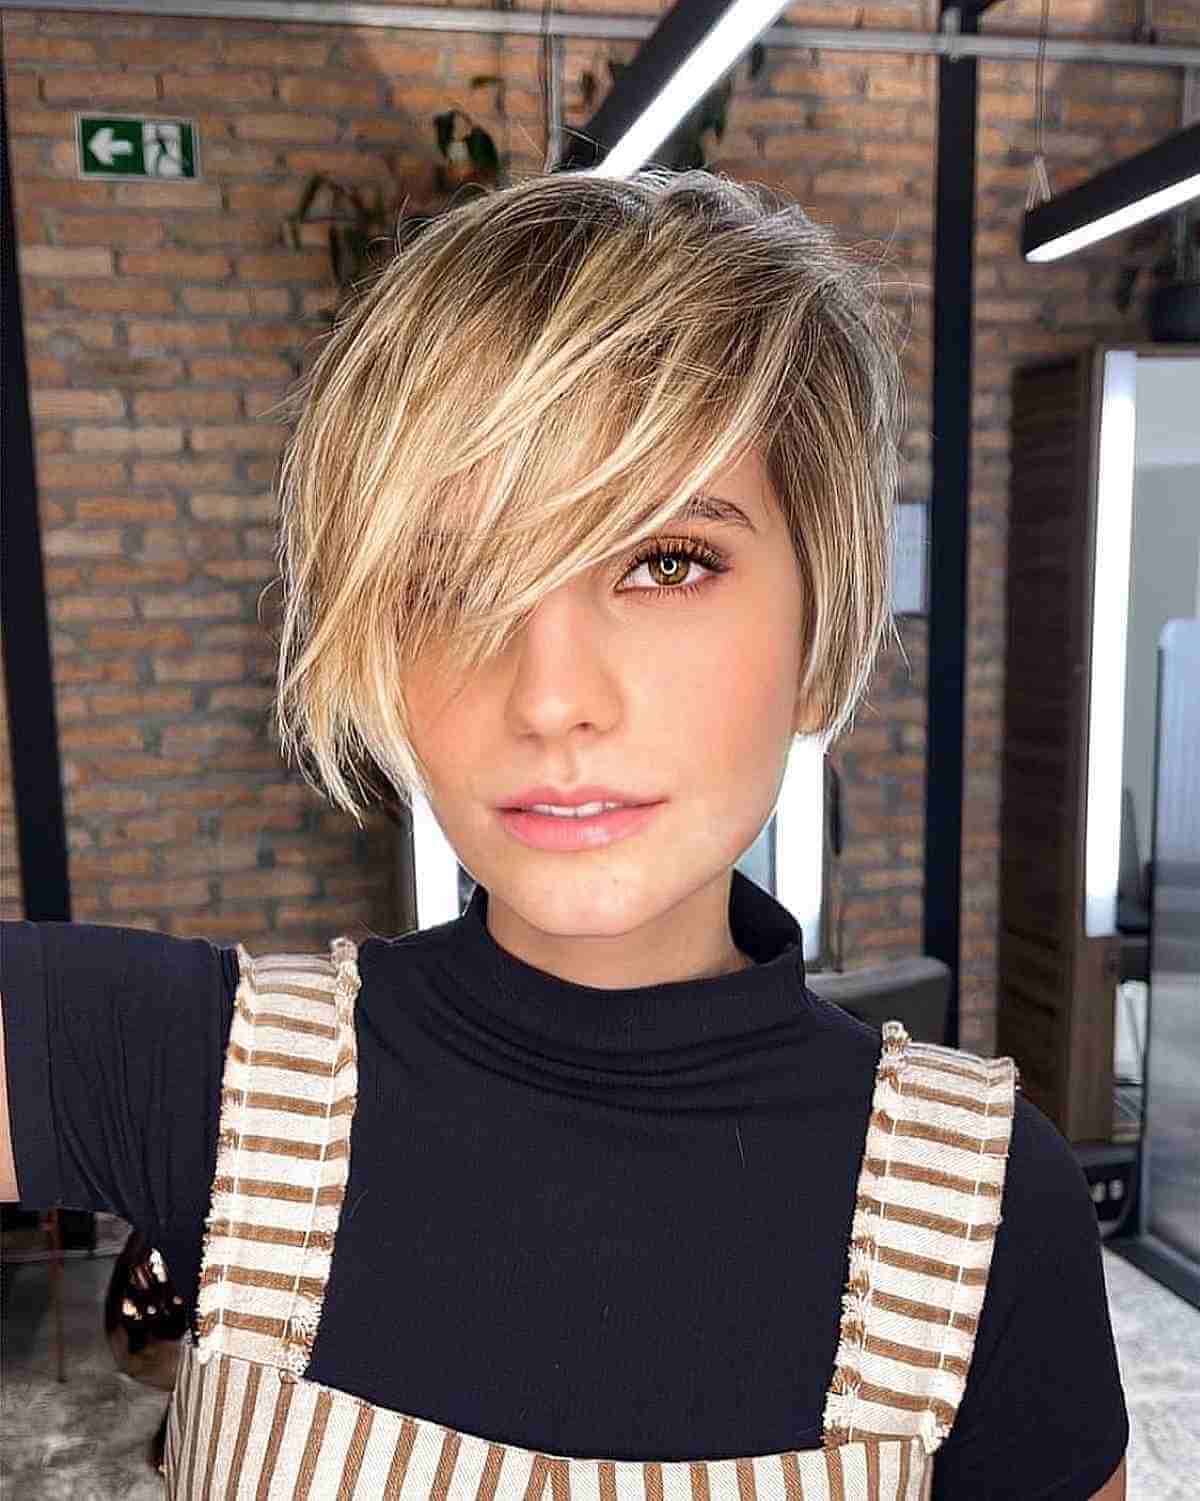 Short Side-Swept Cut with Long Bangs at Jaw-Length